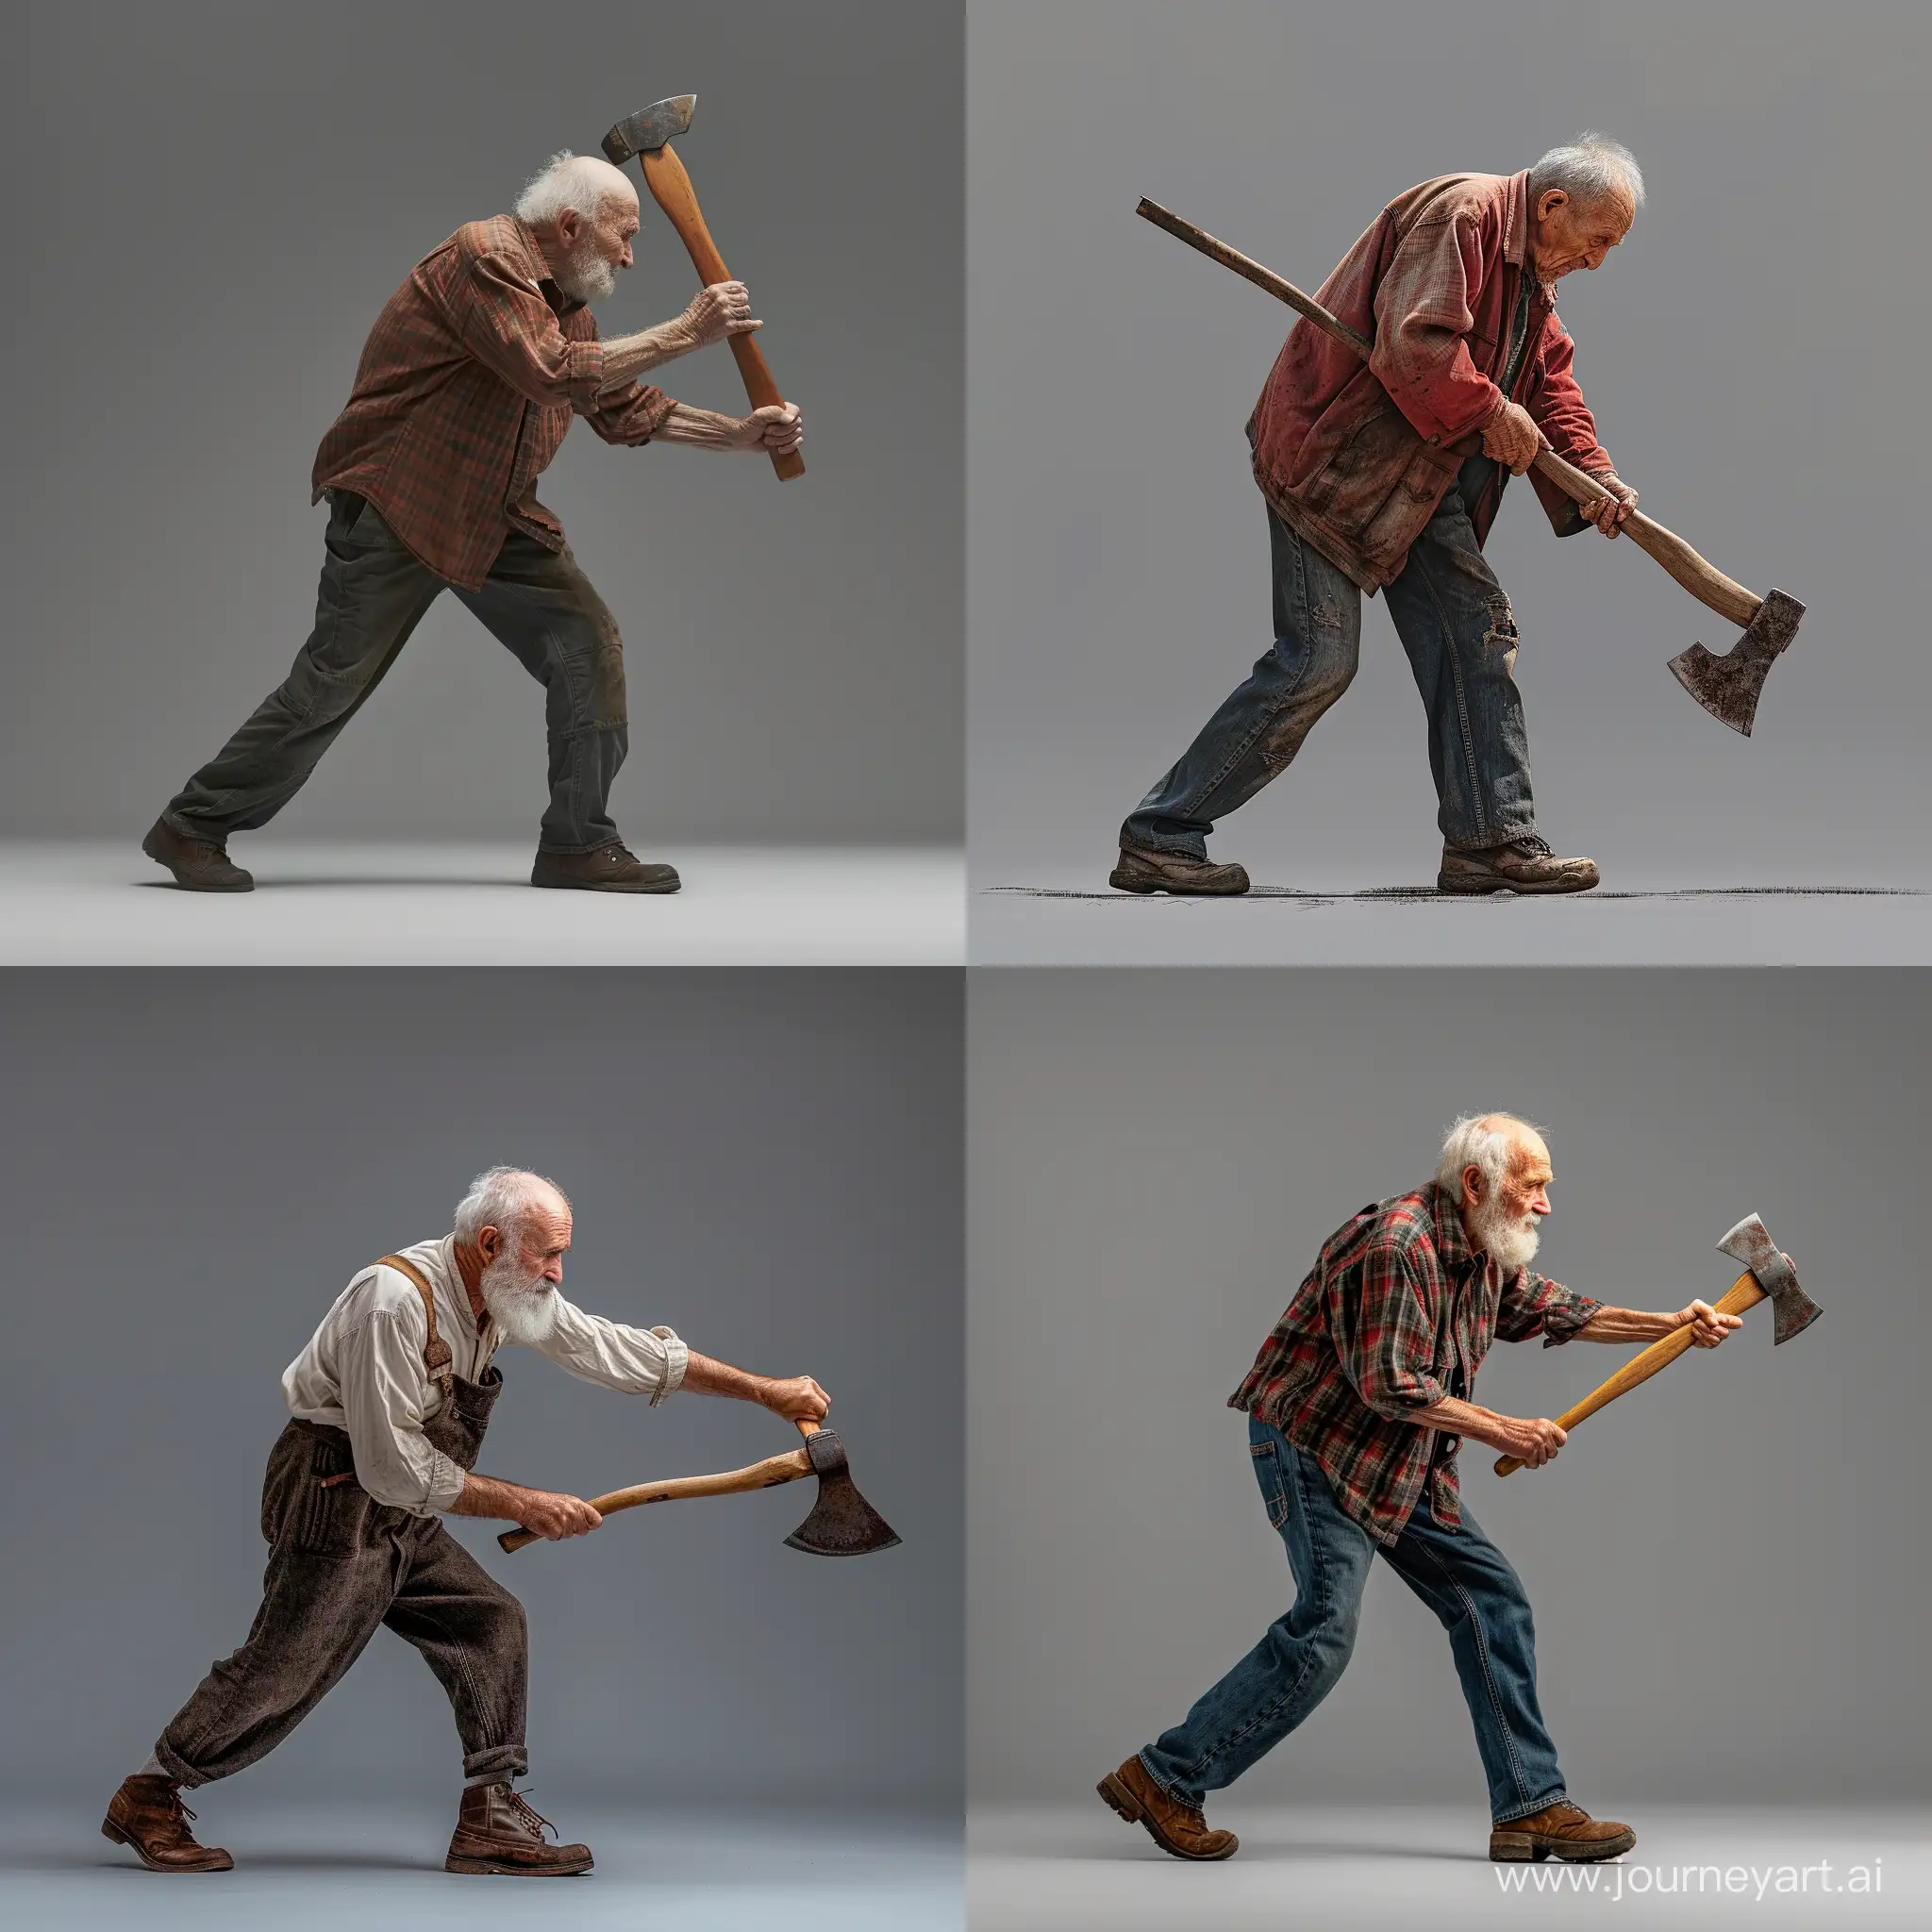 Elderly-Man-Swinging-Ax-in-Profile-Against-Gray-Background